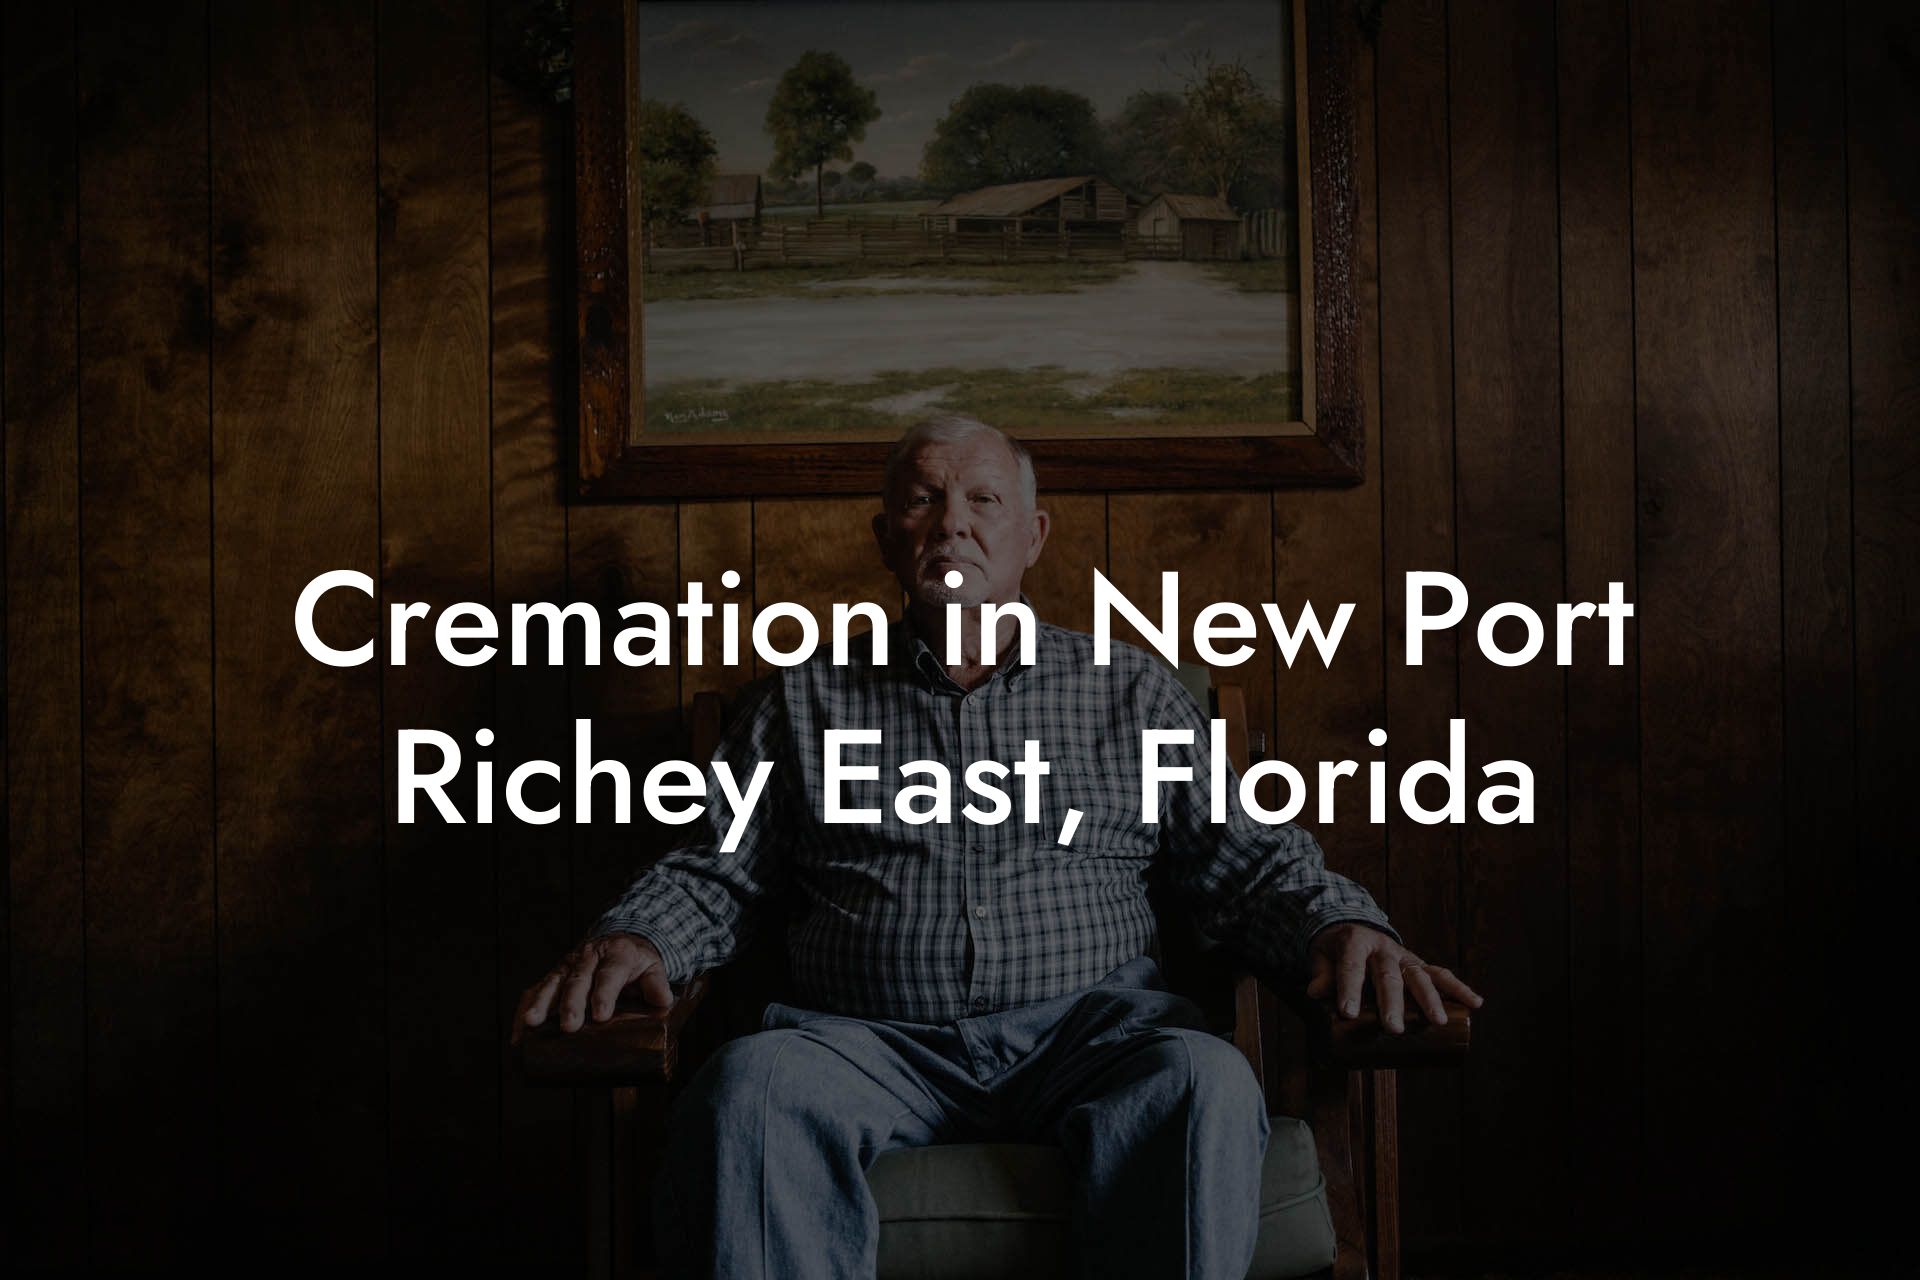 Cremation in New Port Richey East, Florida